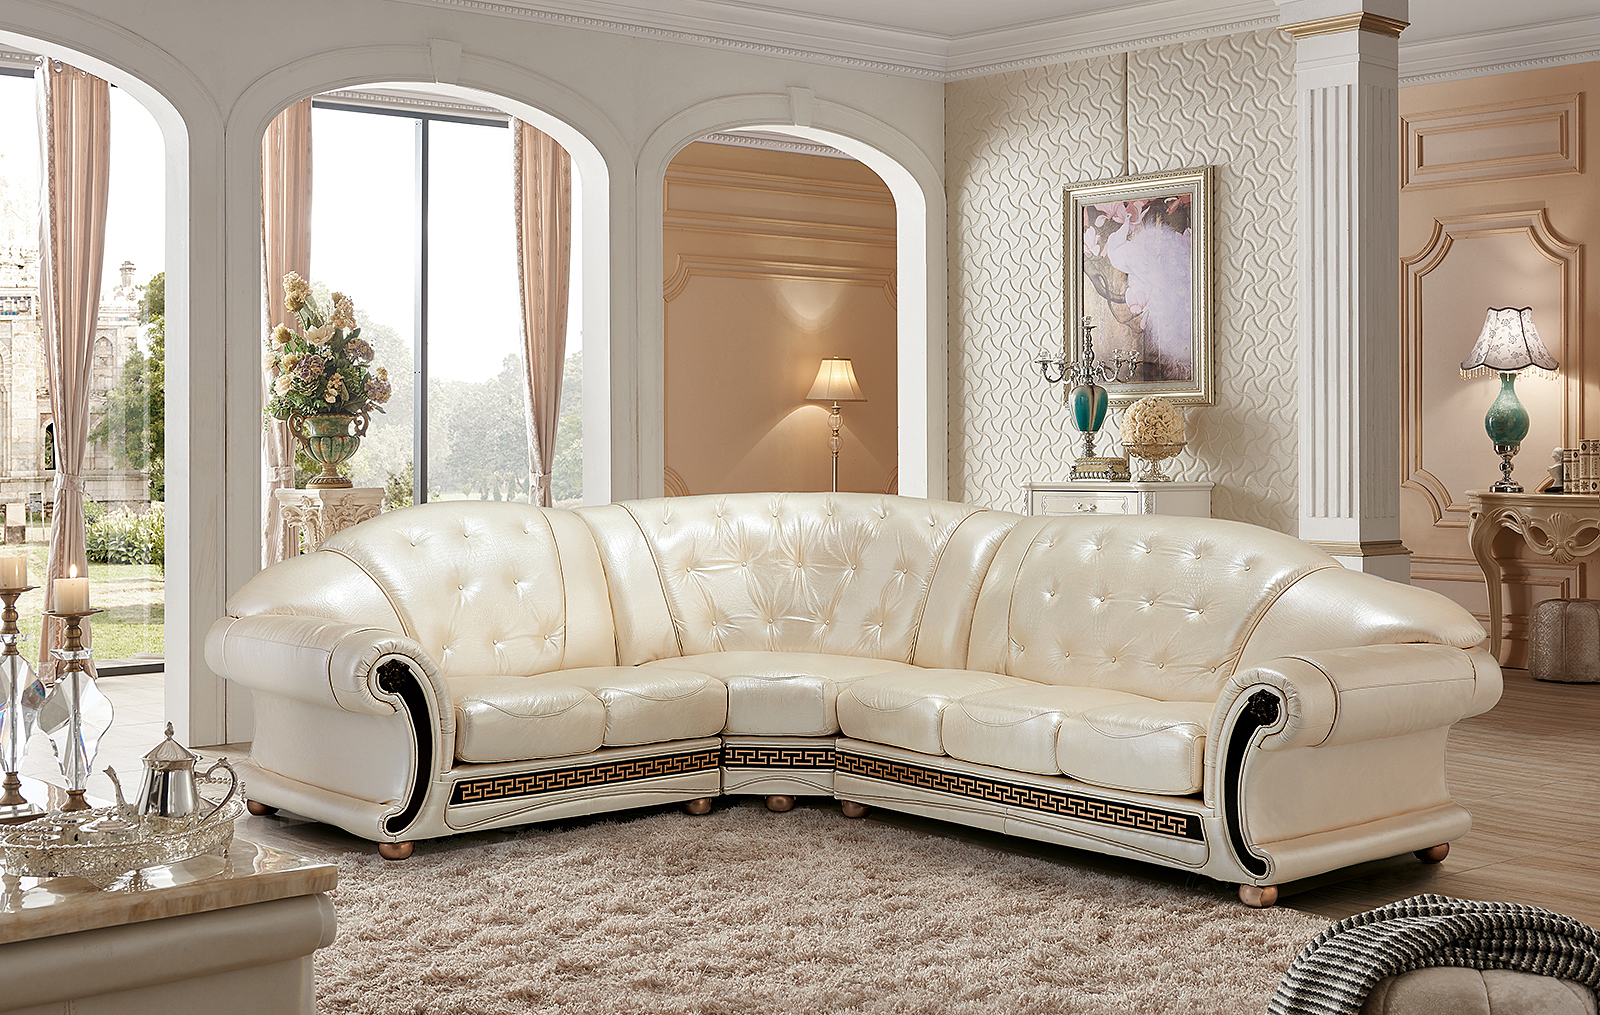 Brands FSH Massage Chairs Apolo Sectional Pearl